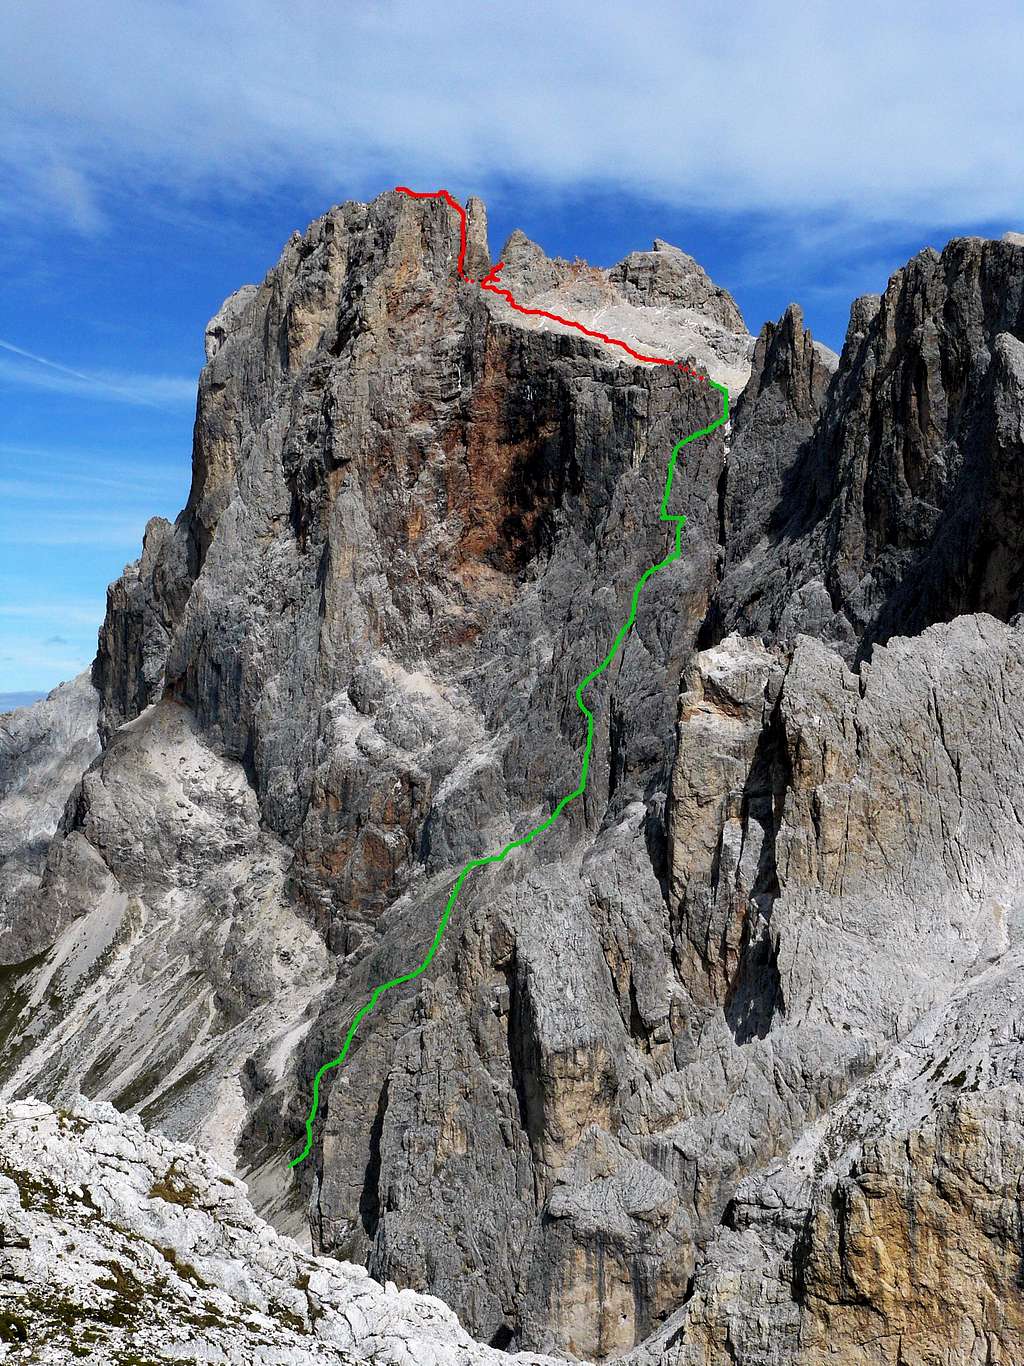 The ferrata and the normal route.